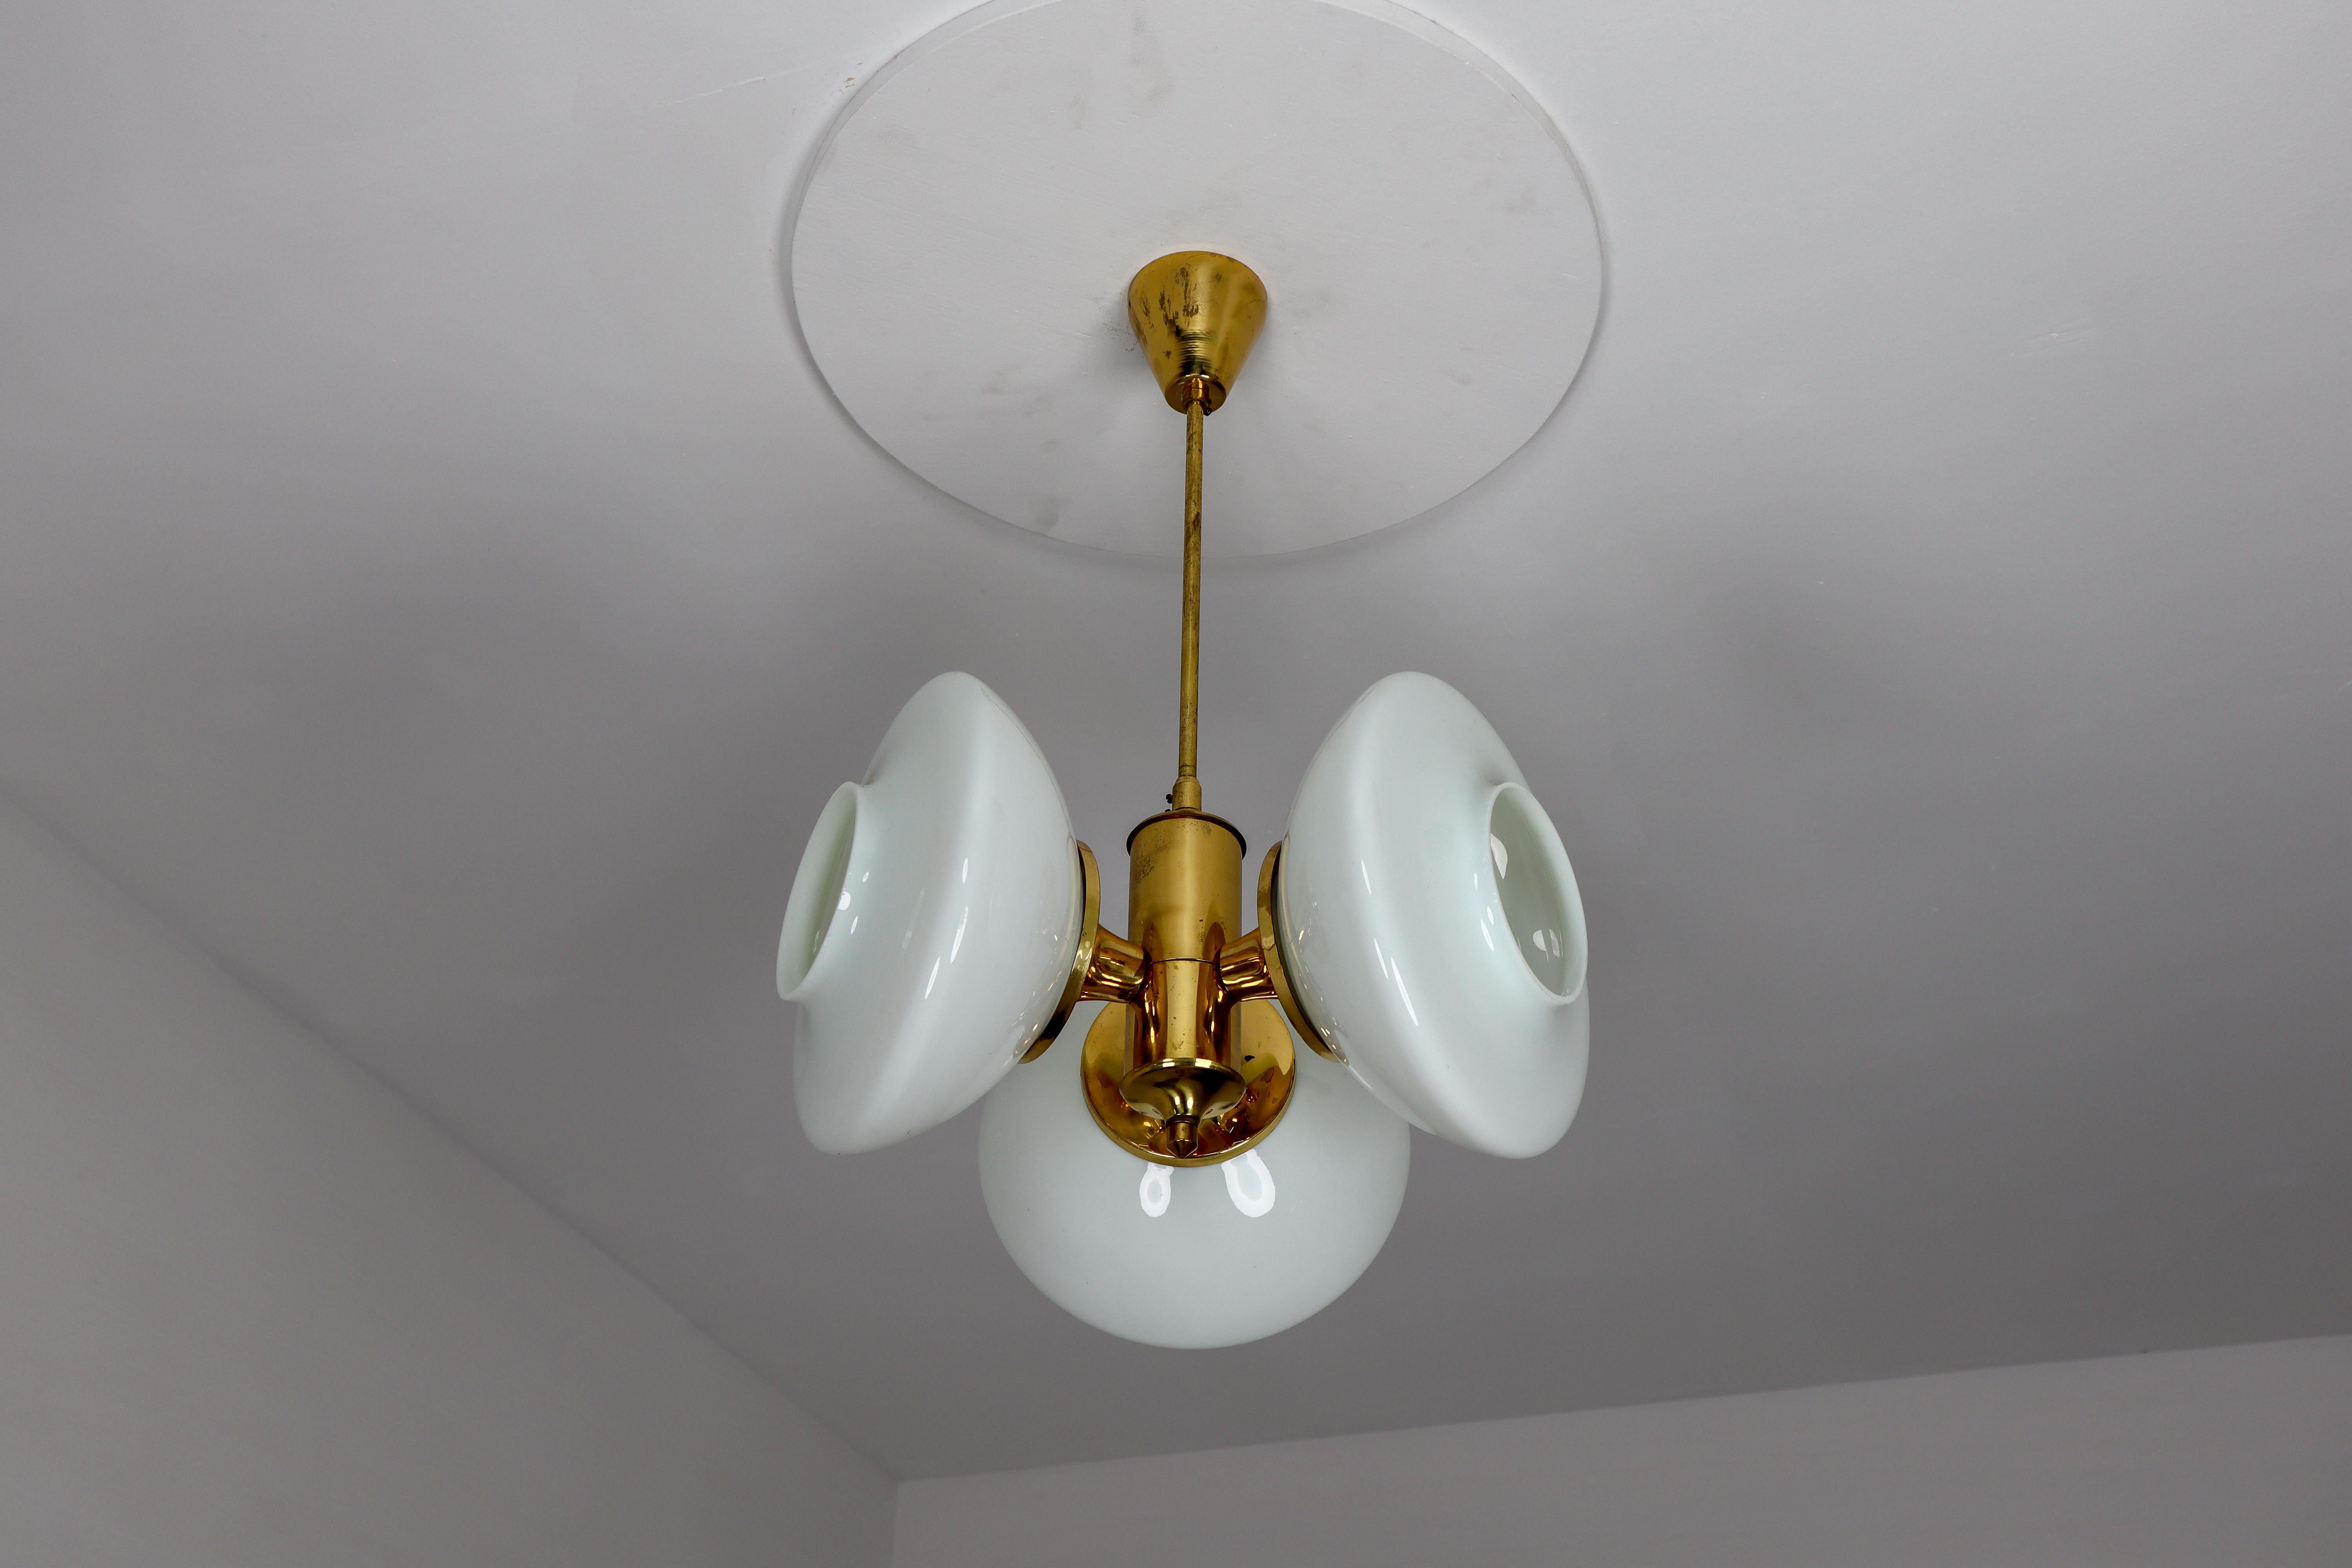 Midcentury chandelier with brass fixture and opaline glass. This chandelier with brass frame consist of three lights. The diffuse light it spreads is very atmospheric. Completed with the opaline glass and brass details, this chandelier will